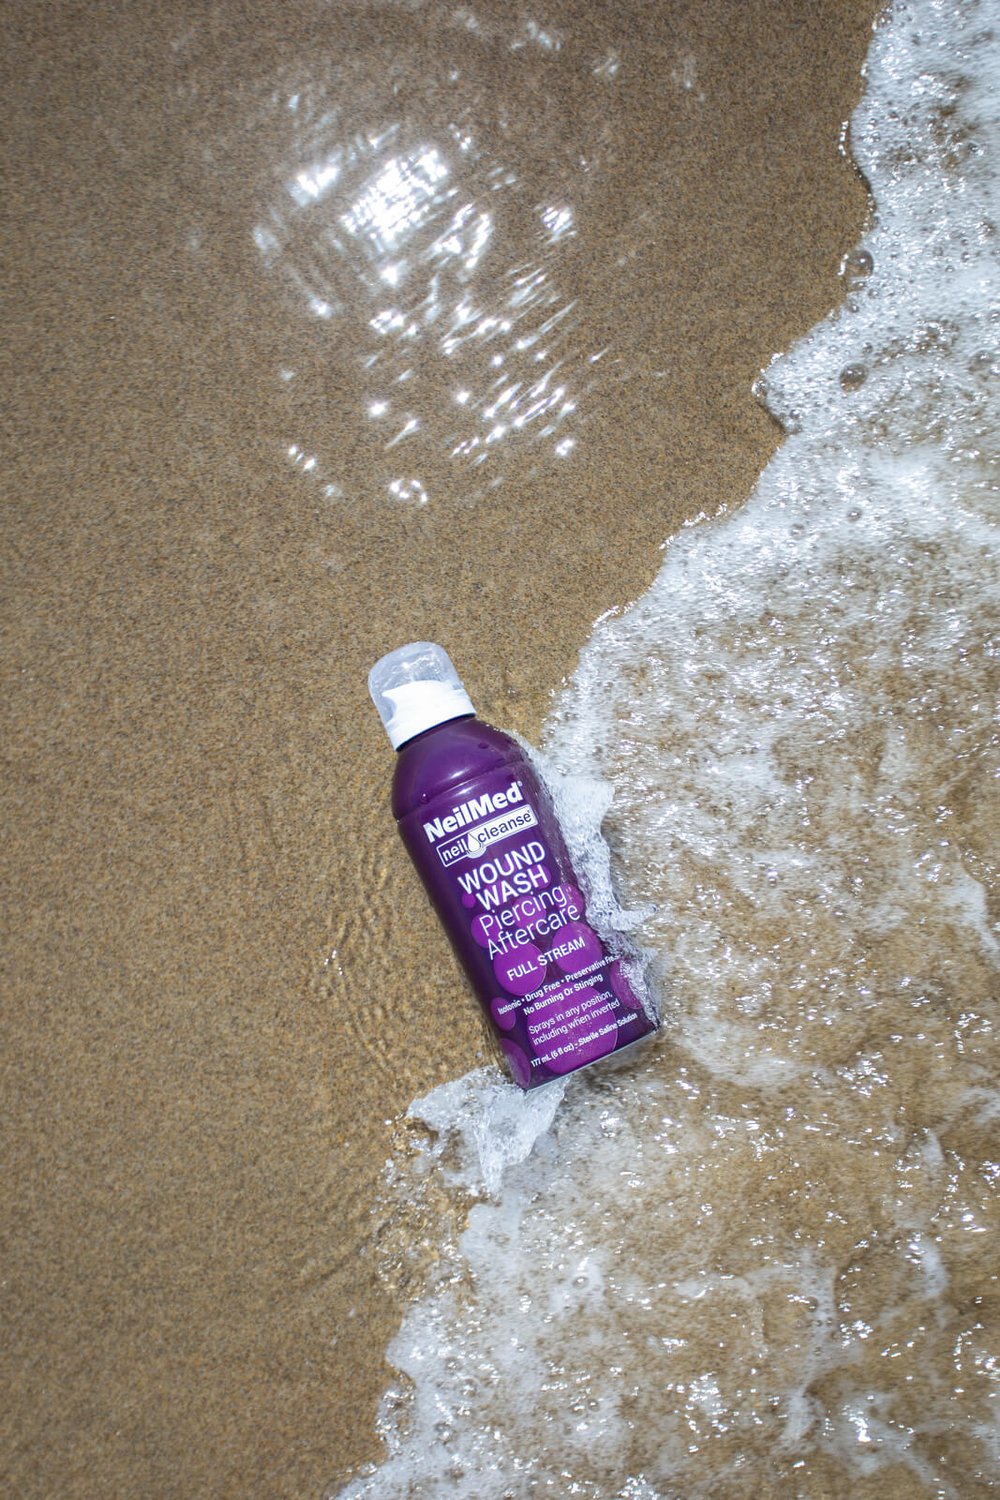 piercing aftercare bottle being splashed by ocean waves on beach